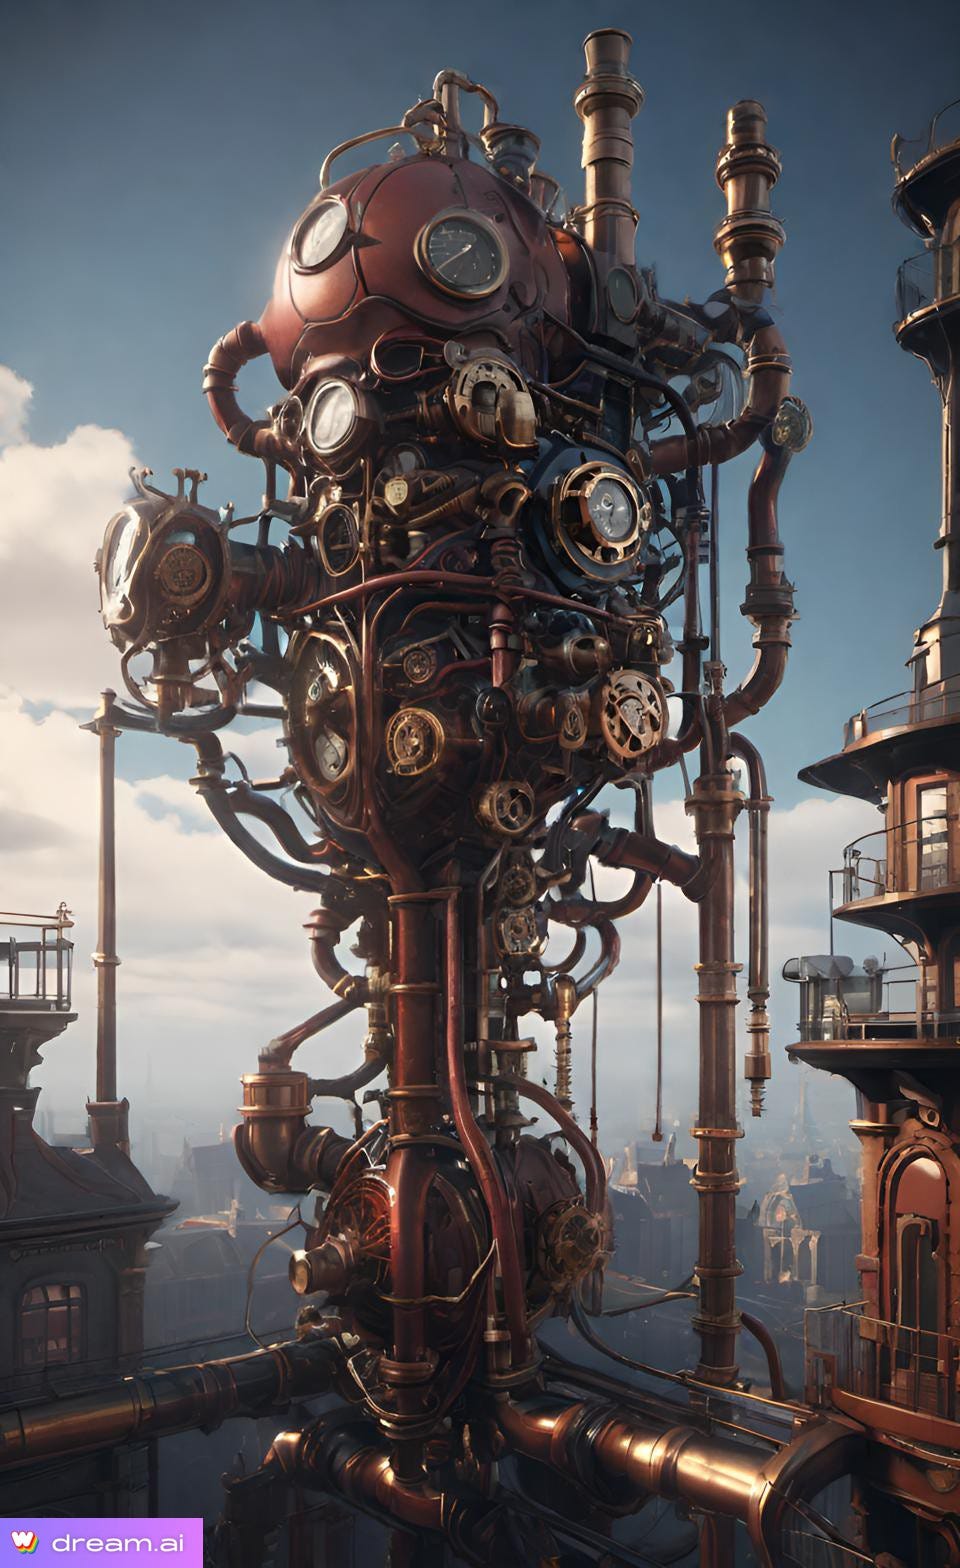 A.I. image of an enormous complex steampunk contraption that is analogous to the heart and central blood vessels